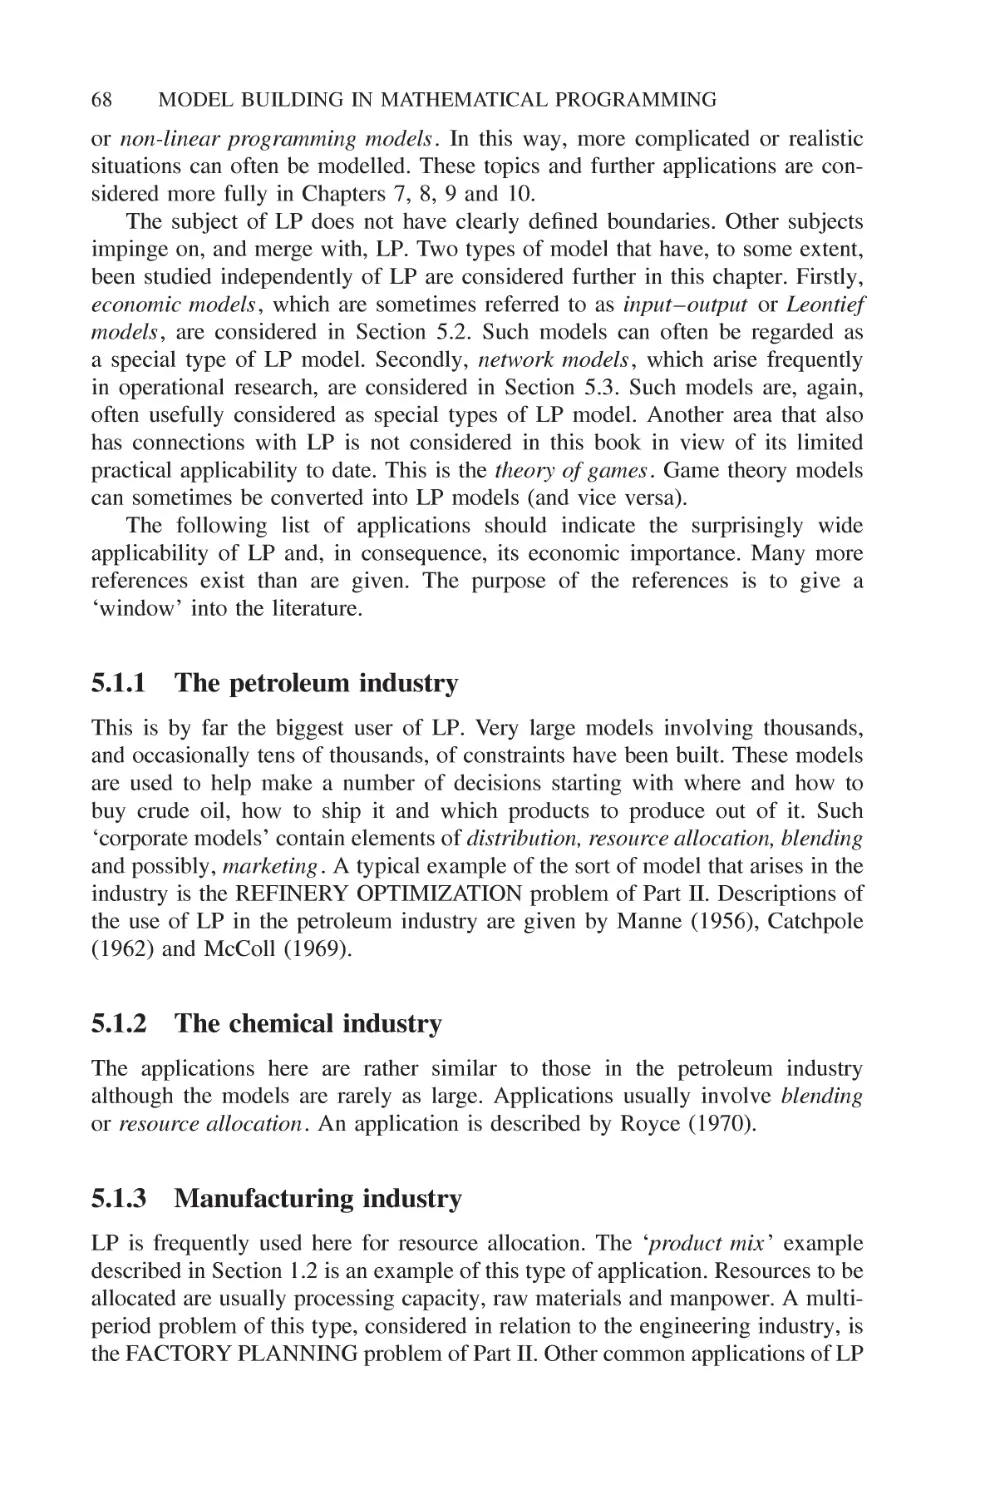 5.1.2 The chemical industry
5.1.3 Manufacturing industry